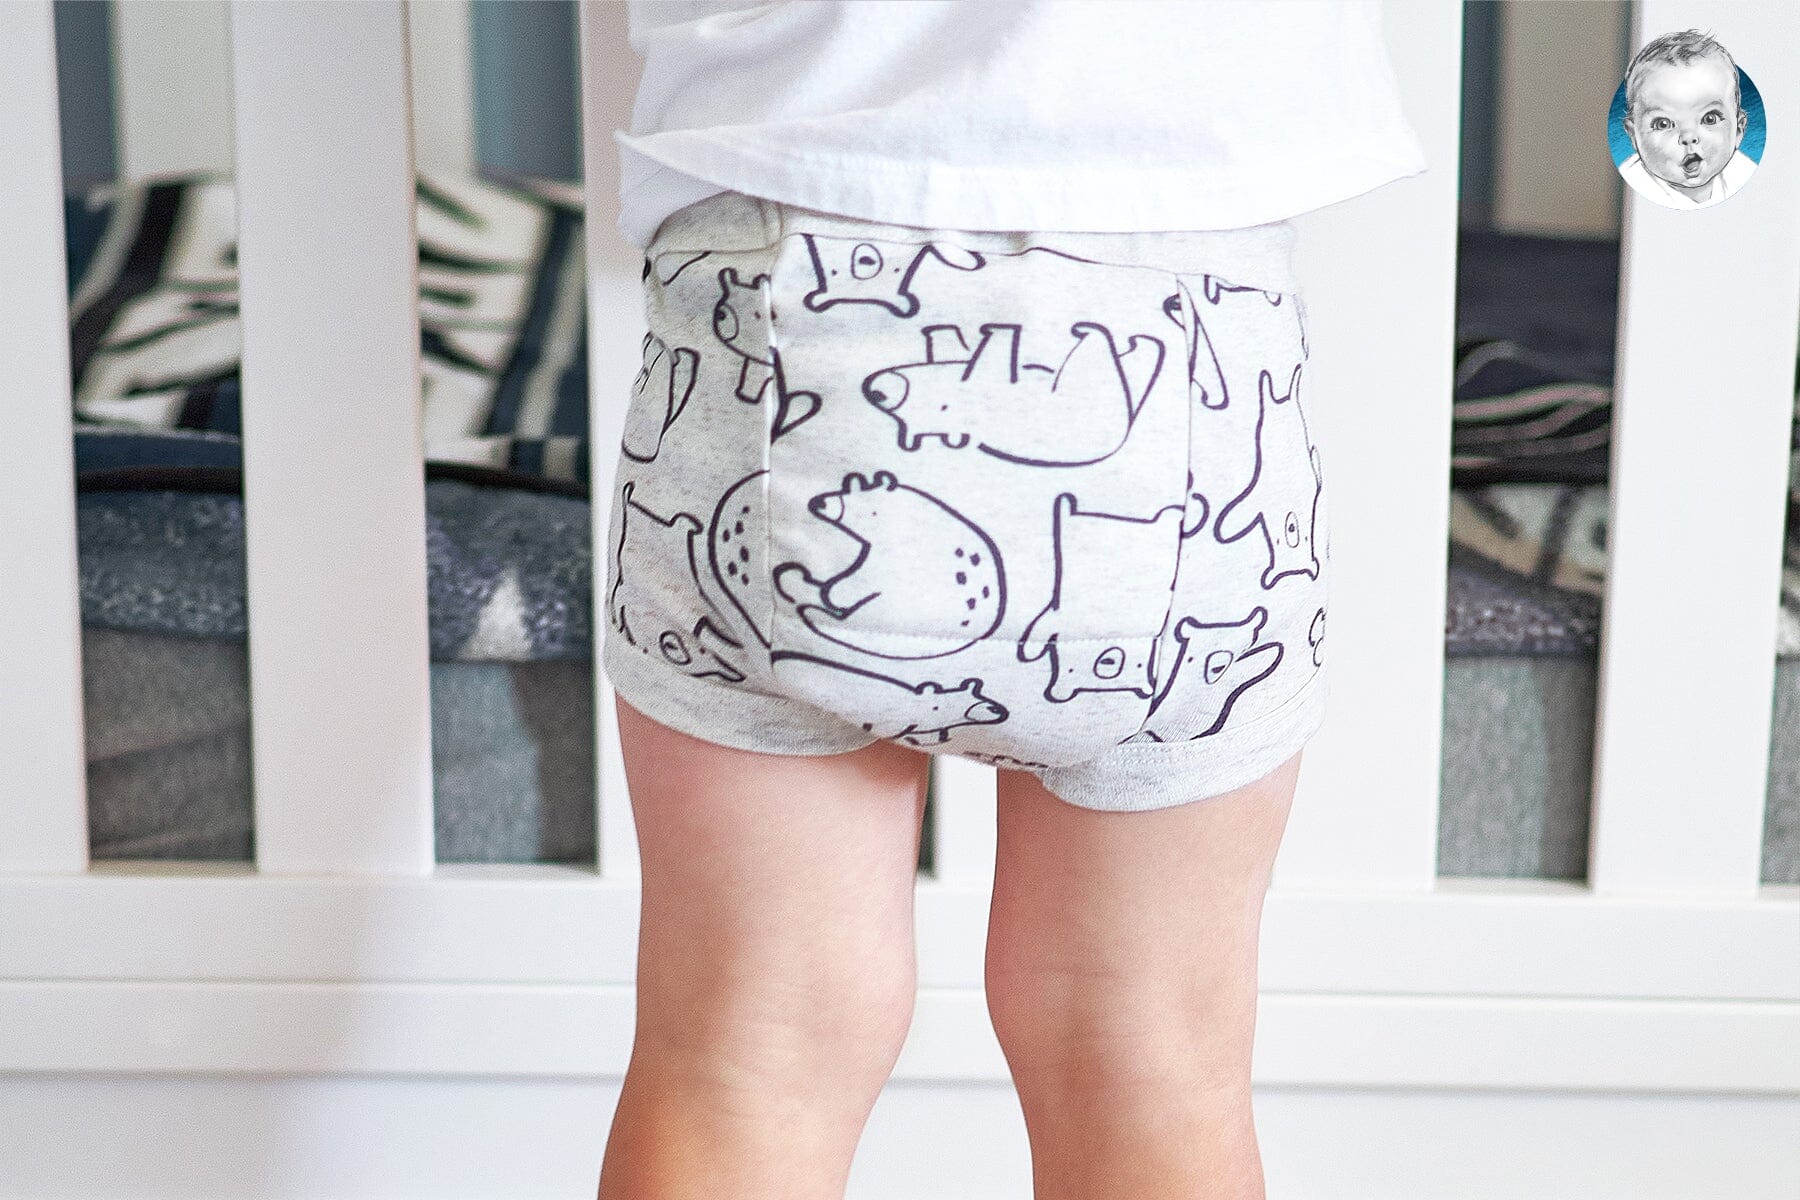 Why You Shouldn't Use Disposable Training Pants for Potty Training